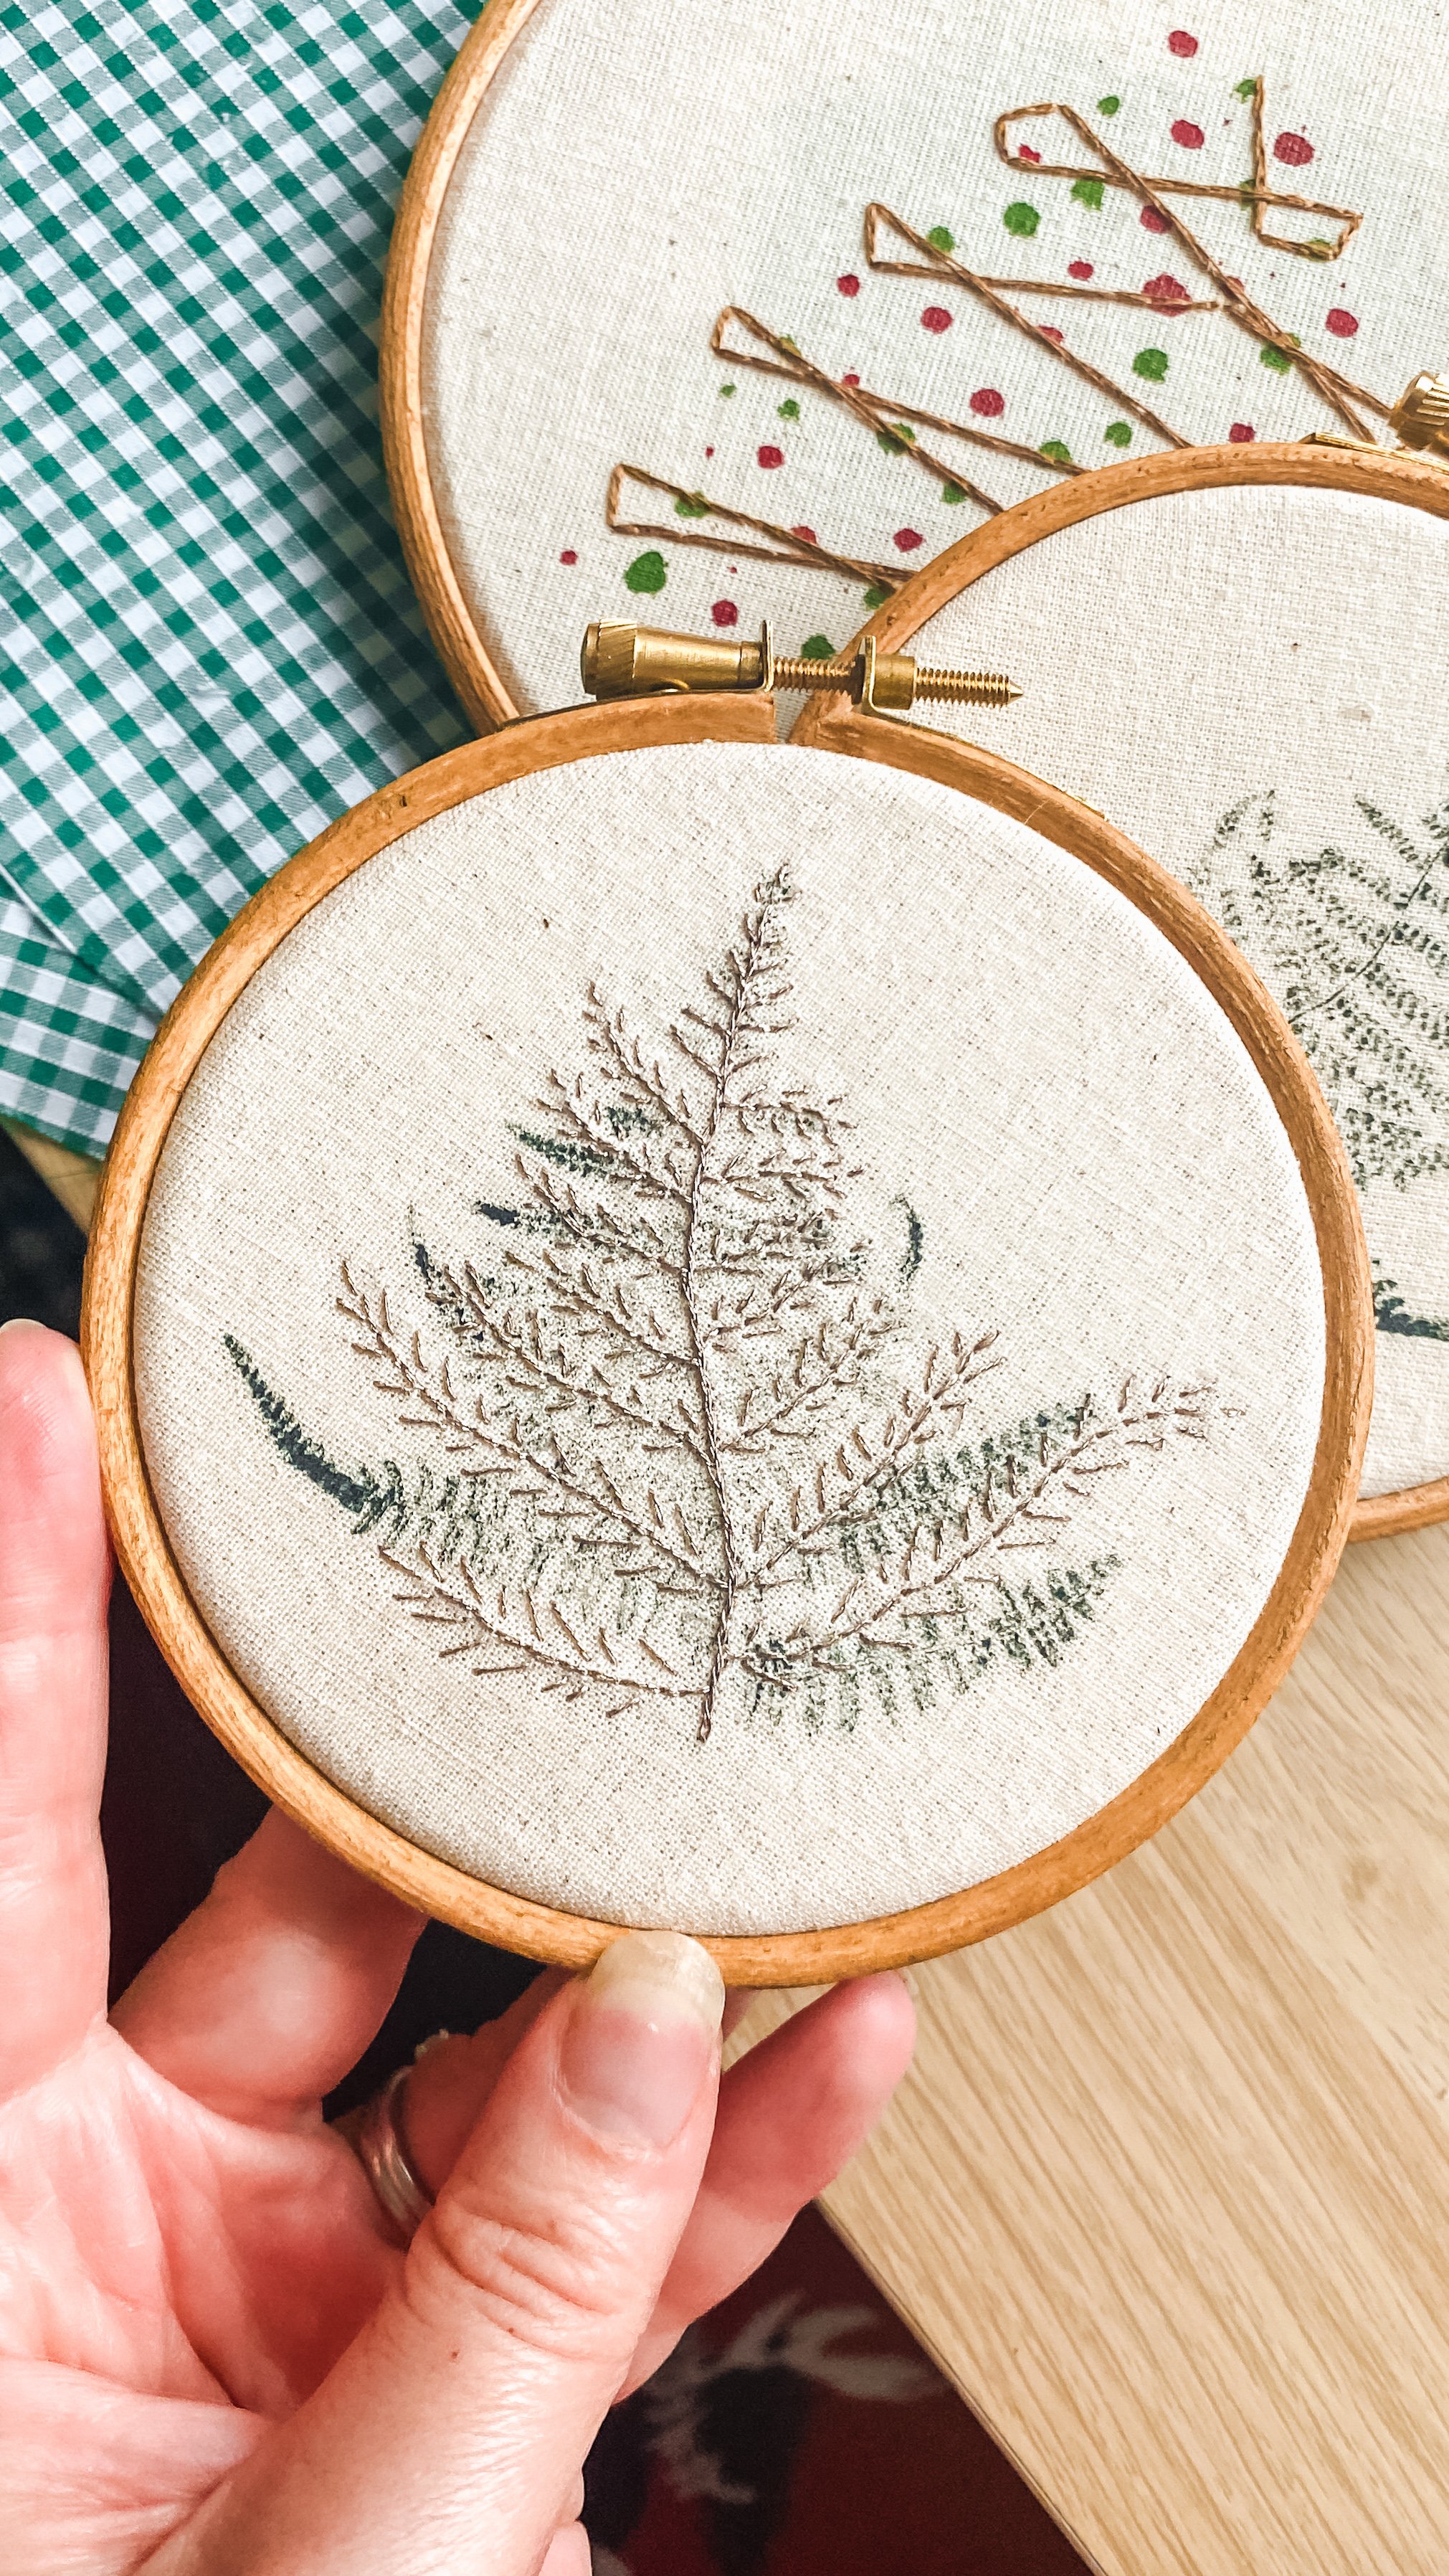 Festive Stamp & Stitch - Print your own Christmas Stocking and Festive Decorations in this embroidery and print-making workshop